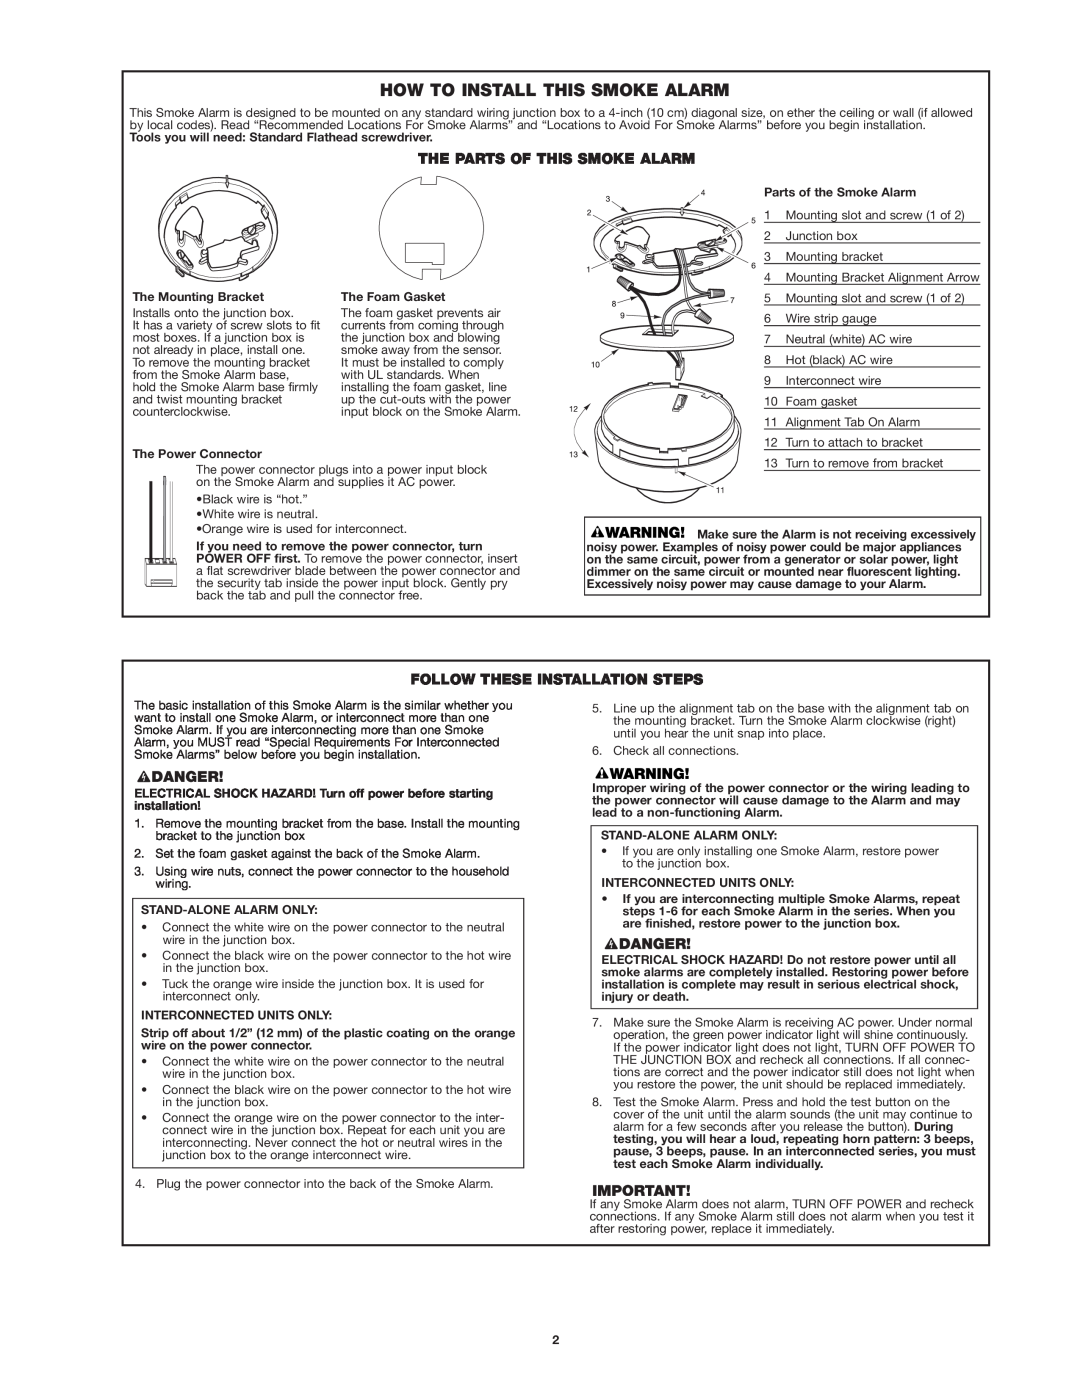 BRK electronic SA100B How To Install This Smoke Alarm, The Parts Of This Smoke Alarm, Follow These Installation Steps 